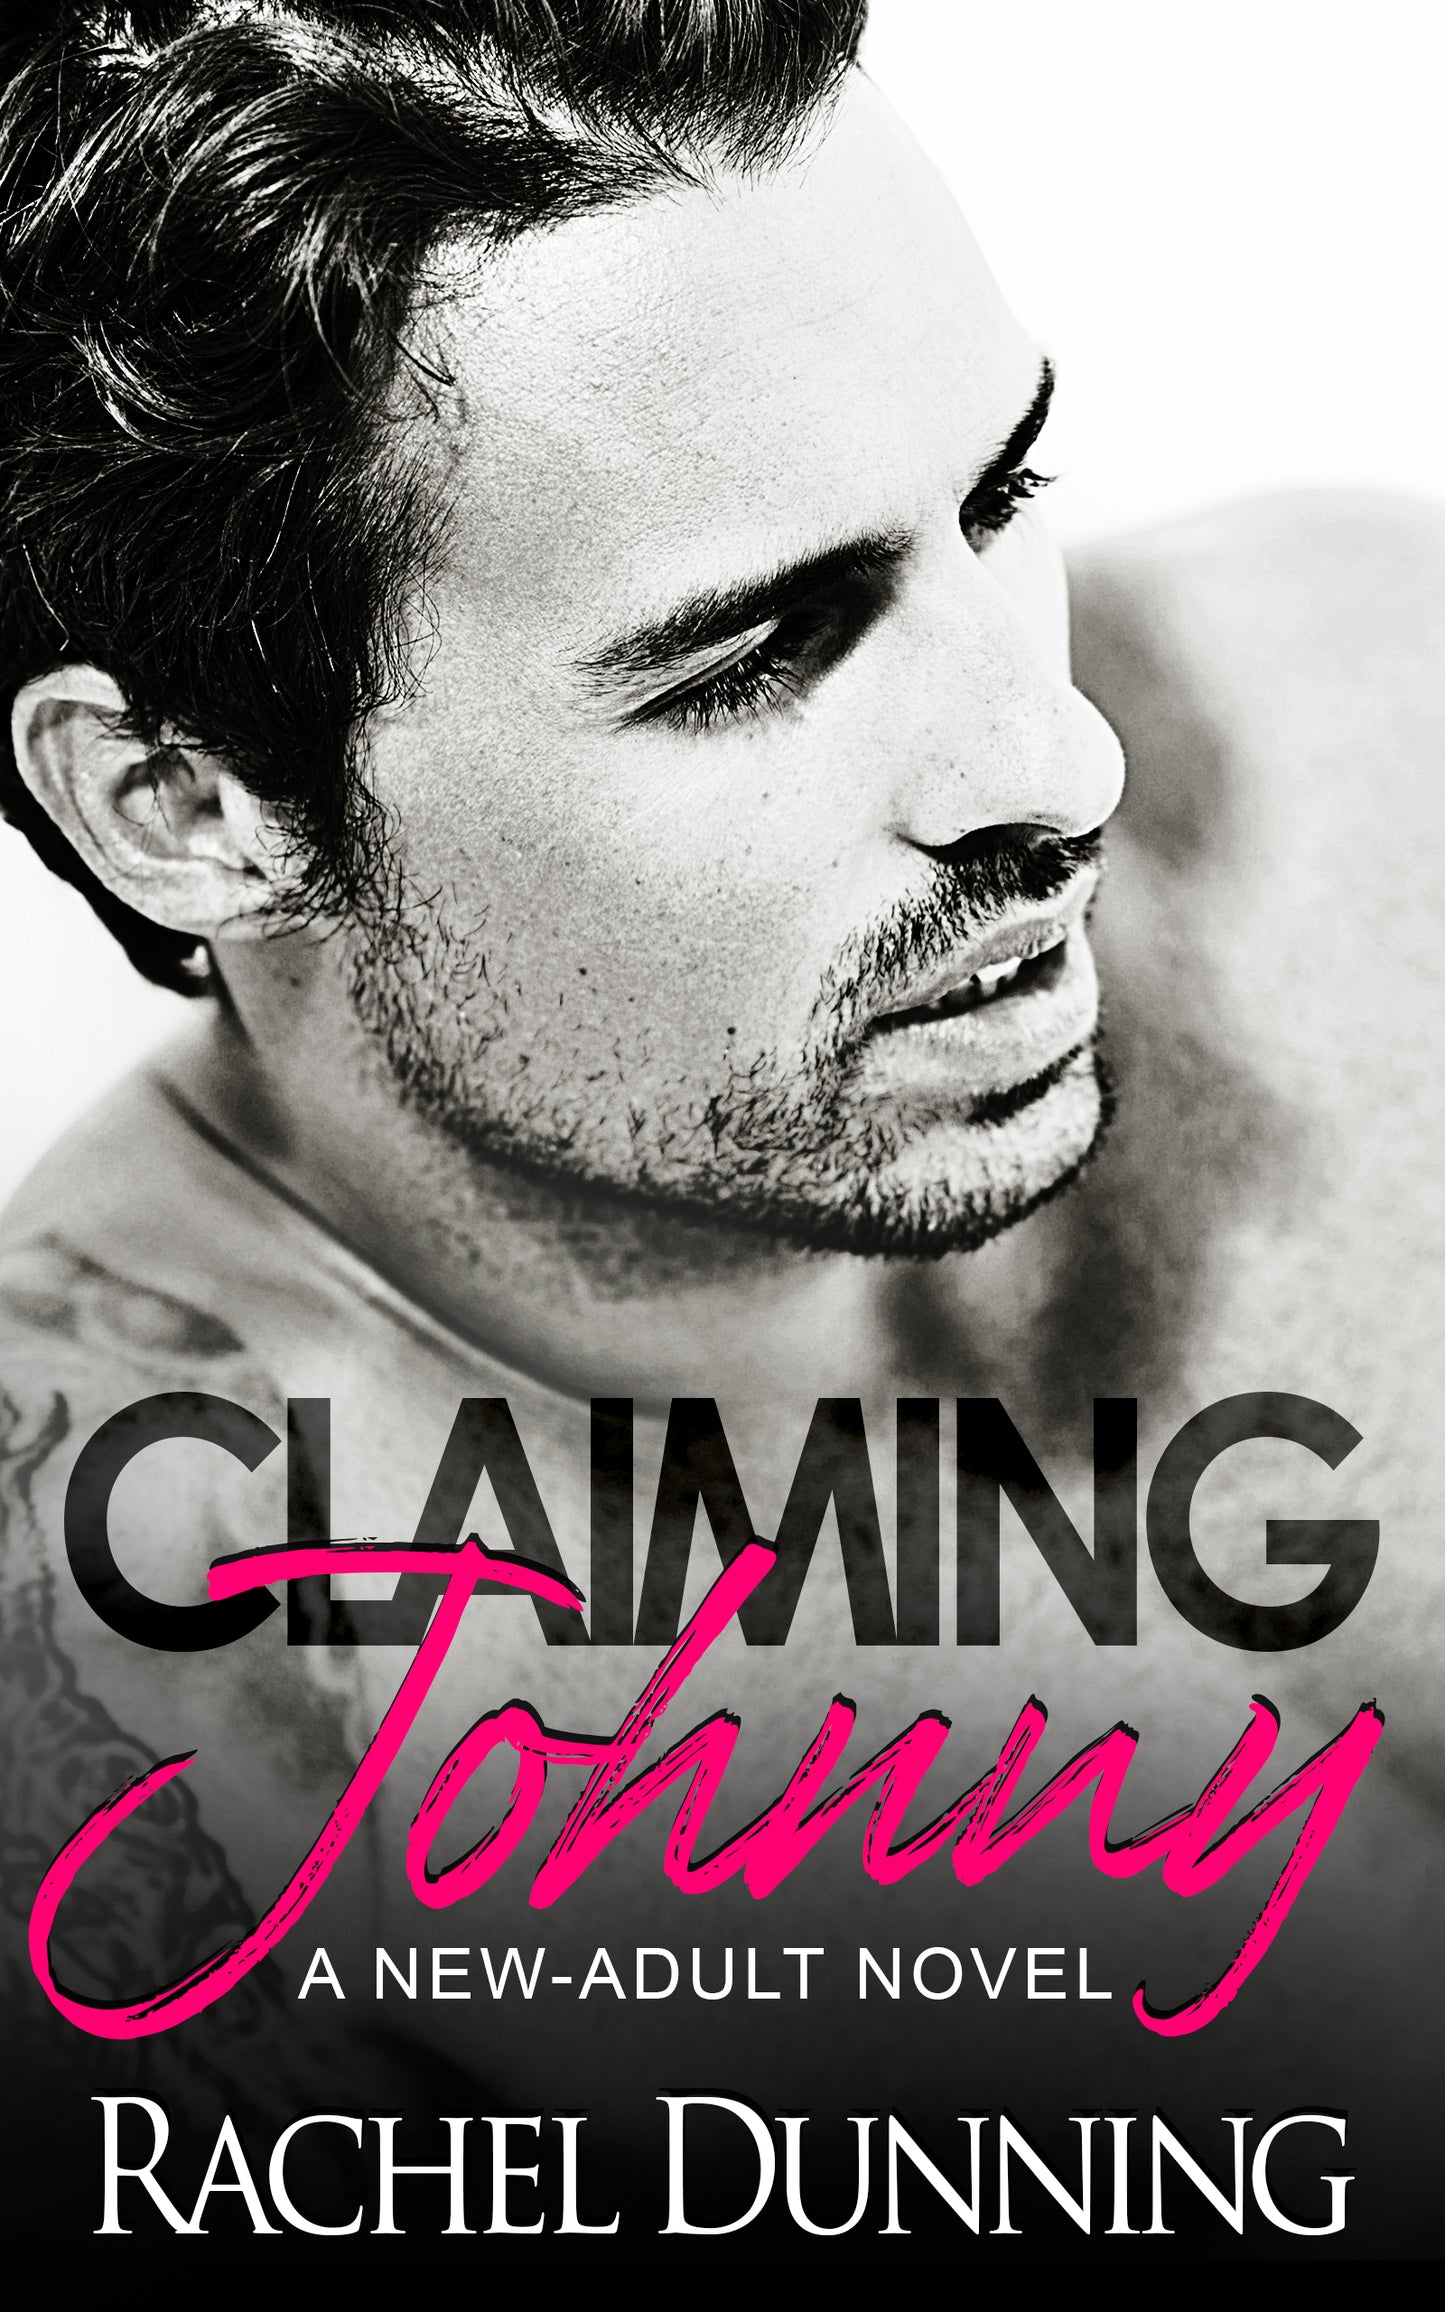 Claiming Johnny - A Second-Chance Romance - Book Four in the Johnny Series (Kindle and ePub)